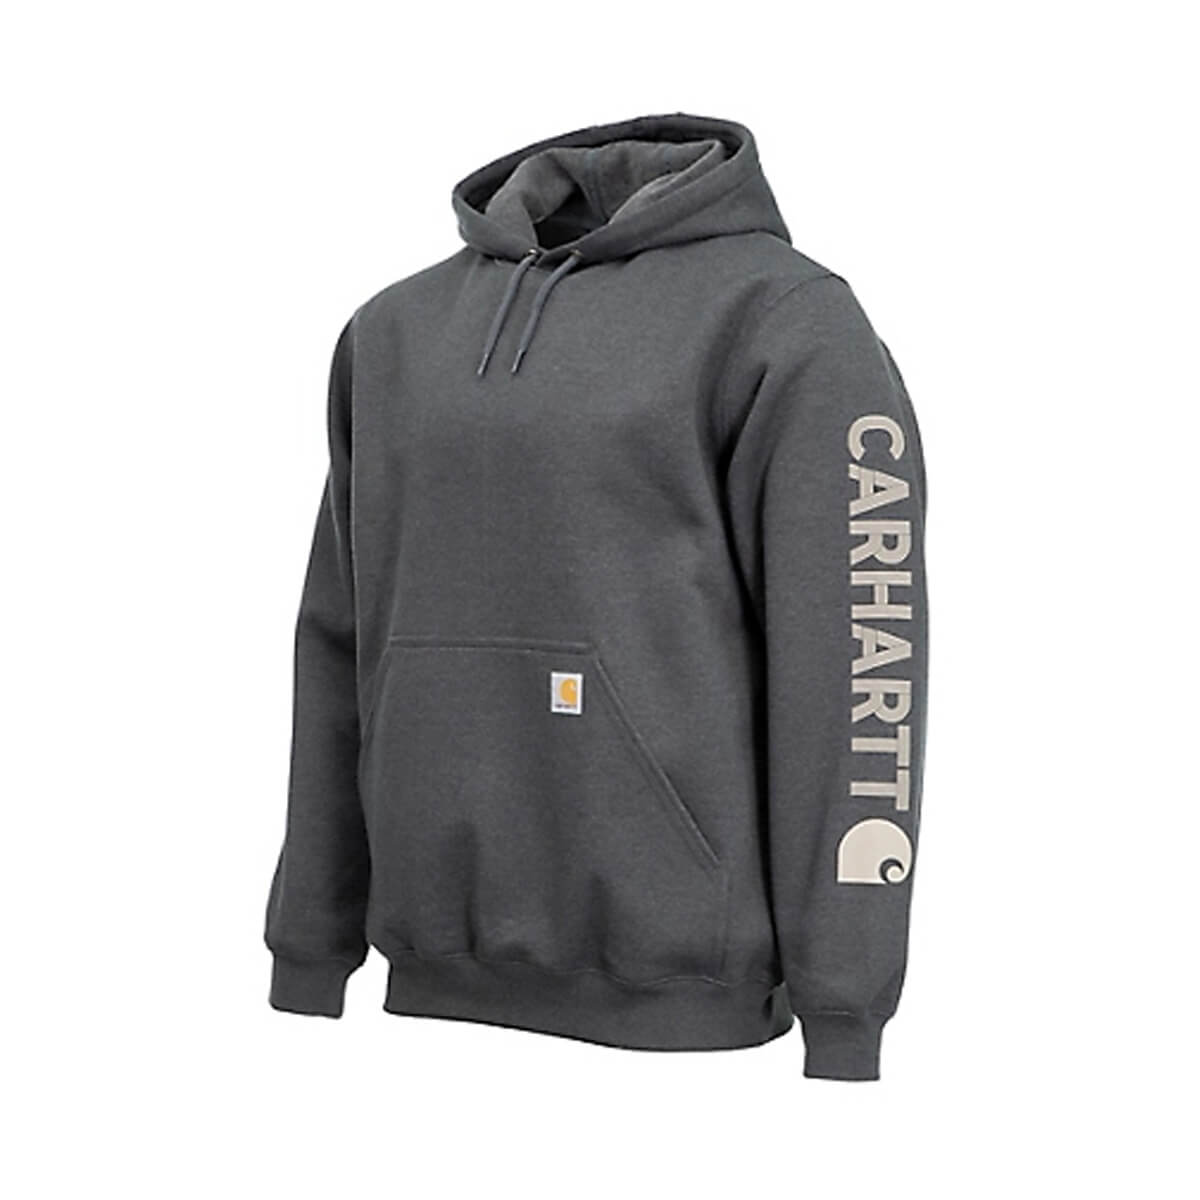 Carhartt Loose Fit Midweight Logo Graphic Sweatshirt - Carbon Heather